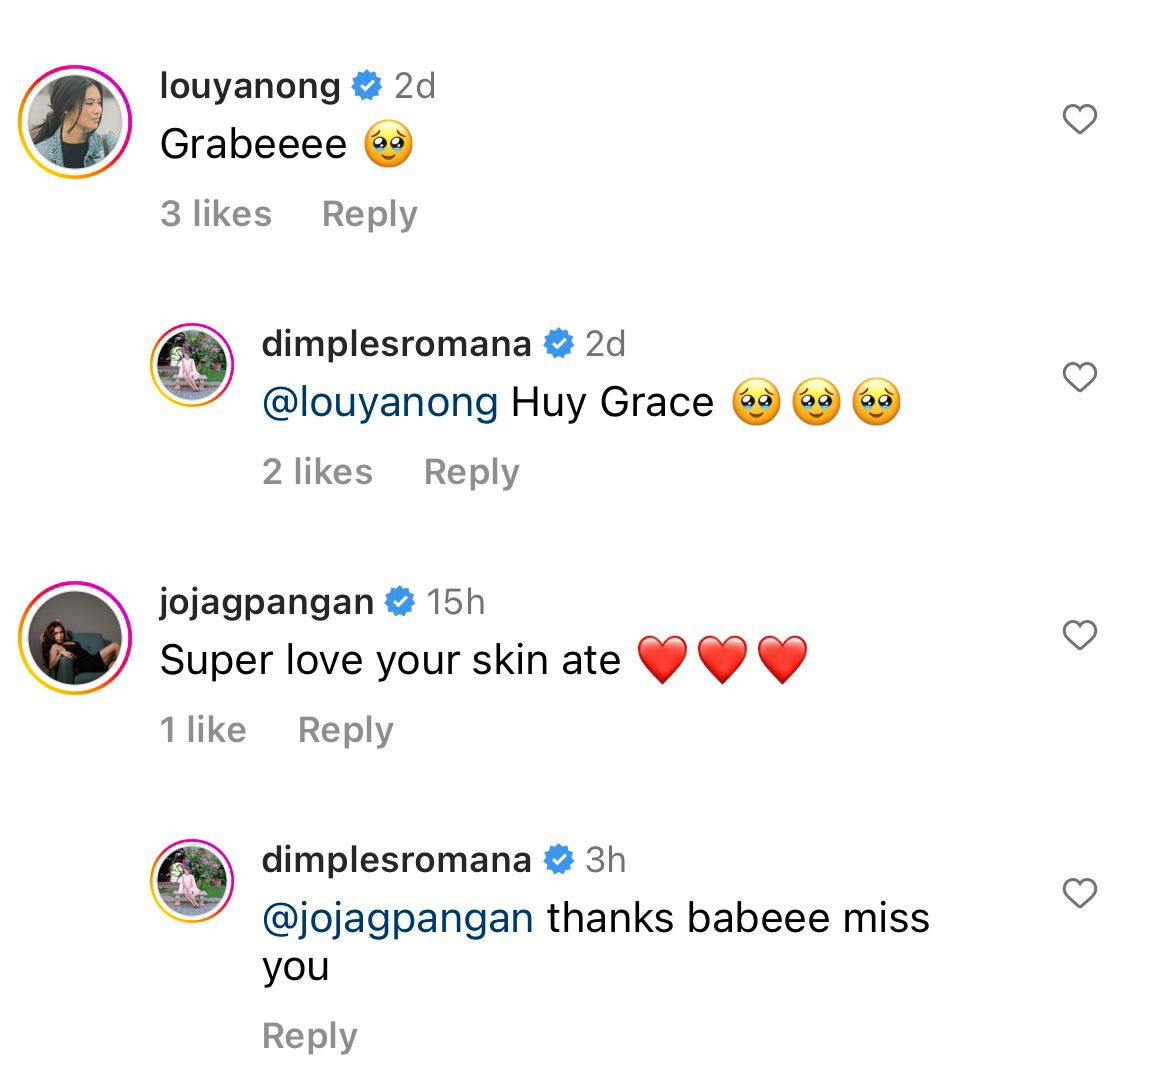 dimples romana empowering comments